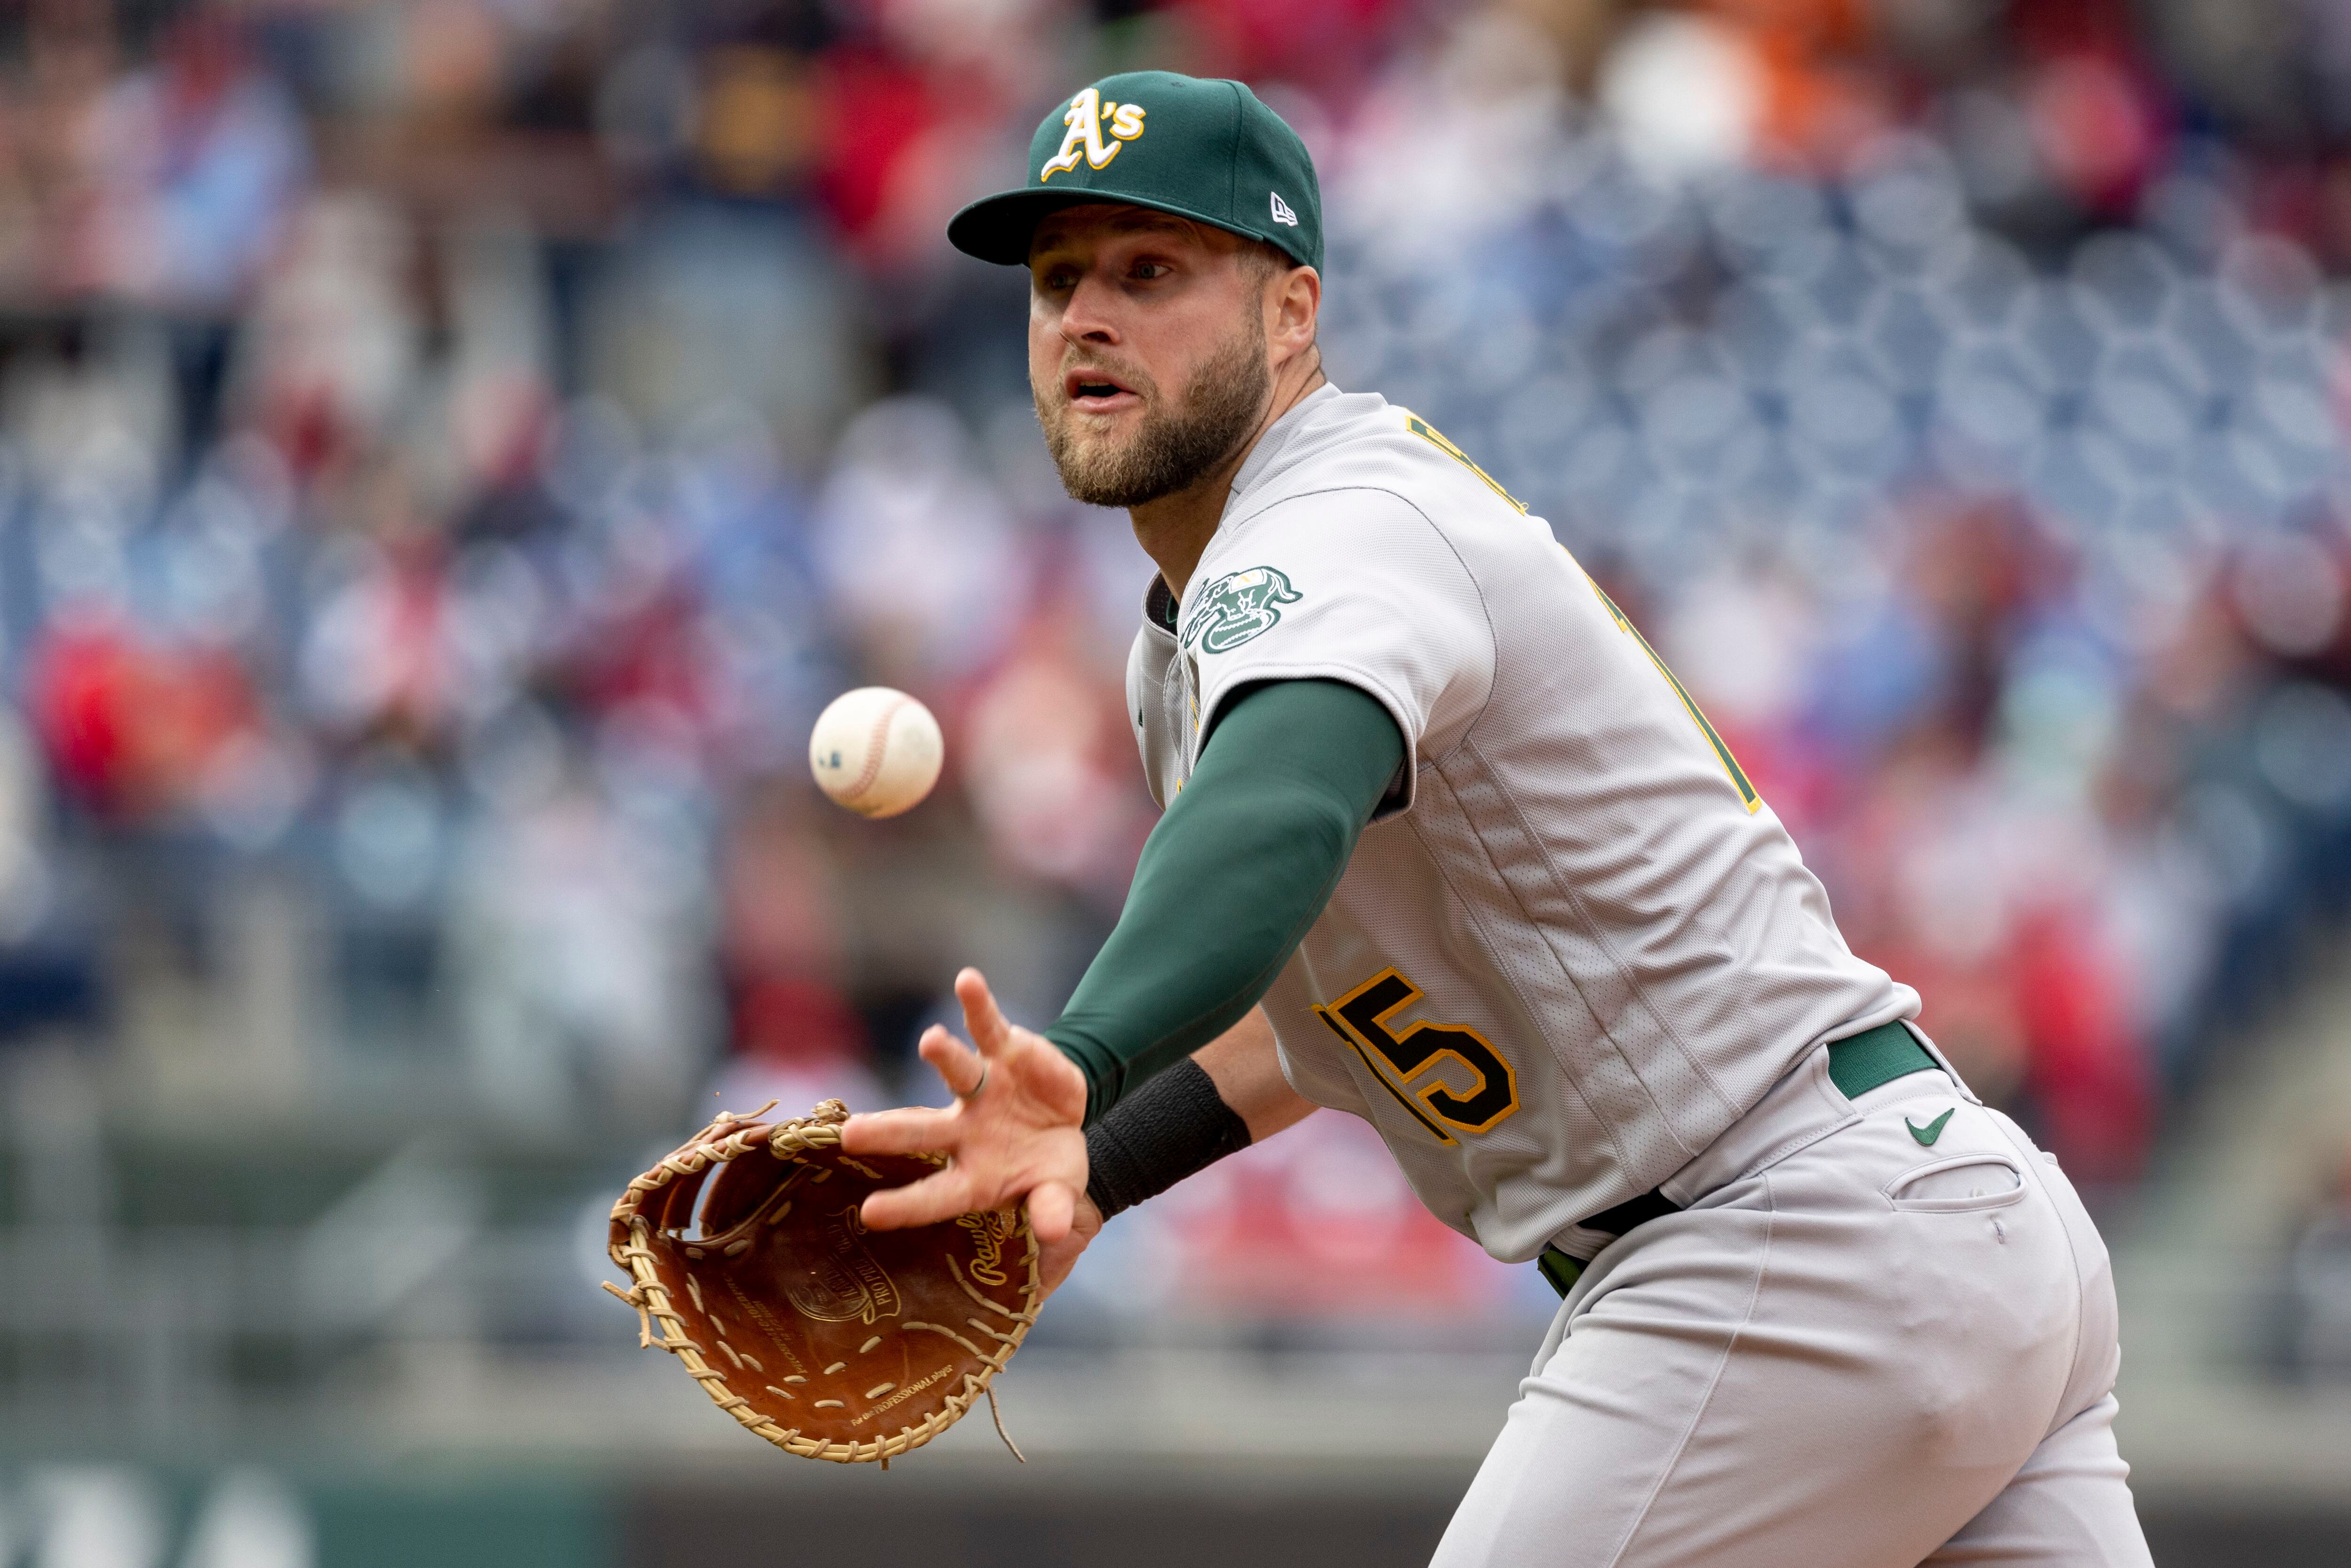 Athletics lose RHP Lou Trivino for season after shower fall